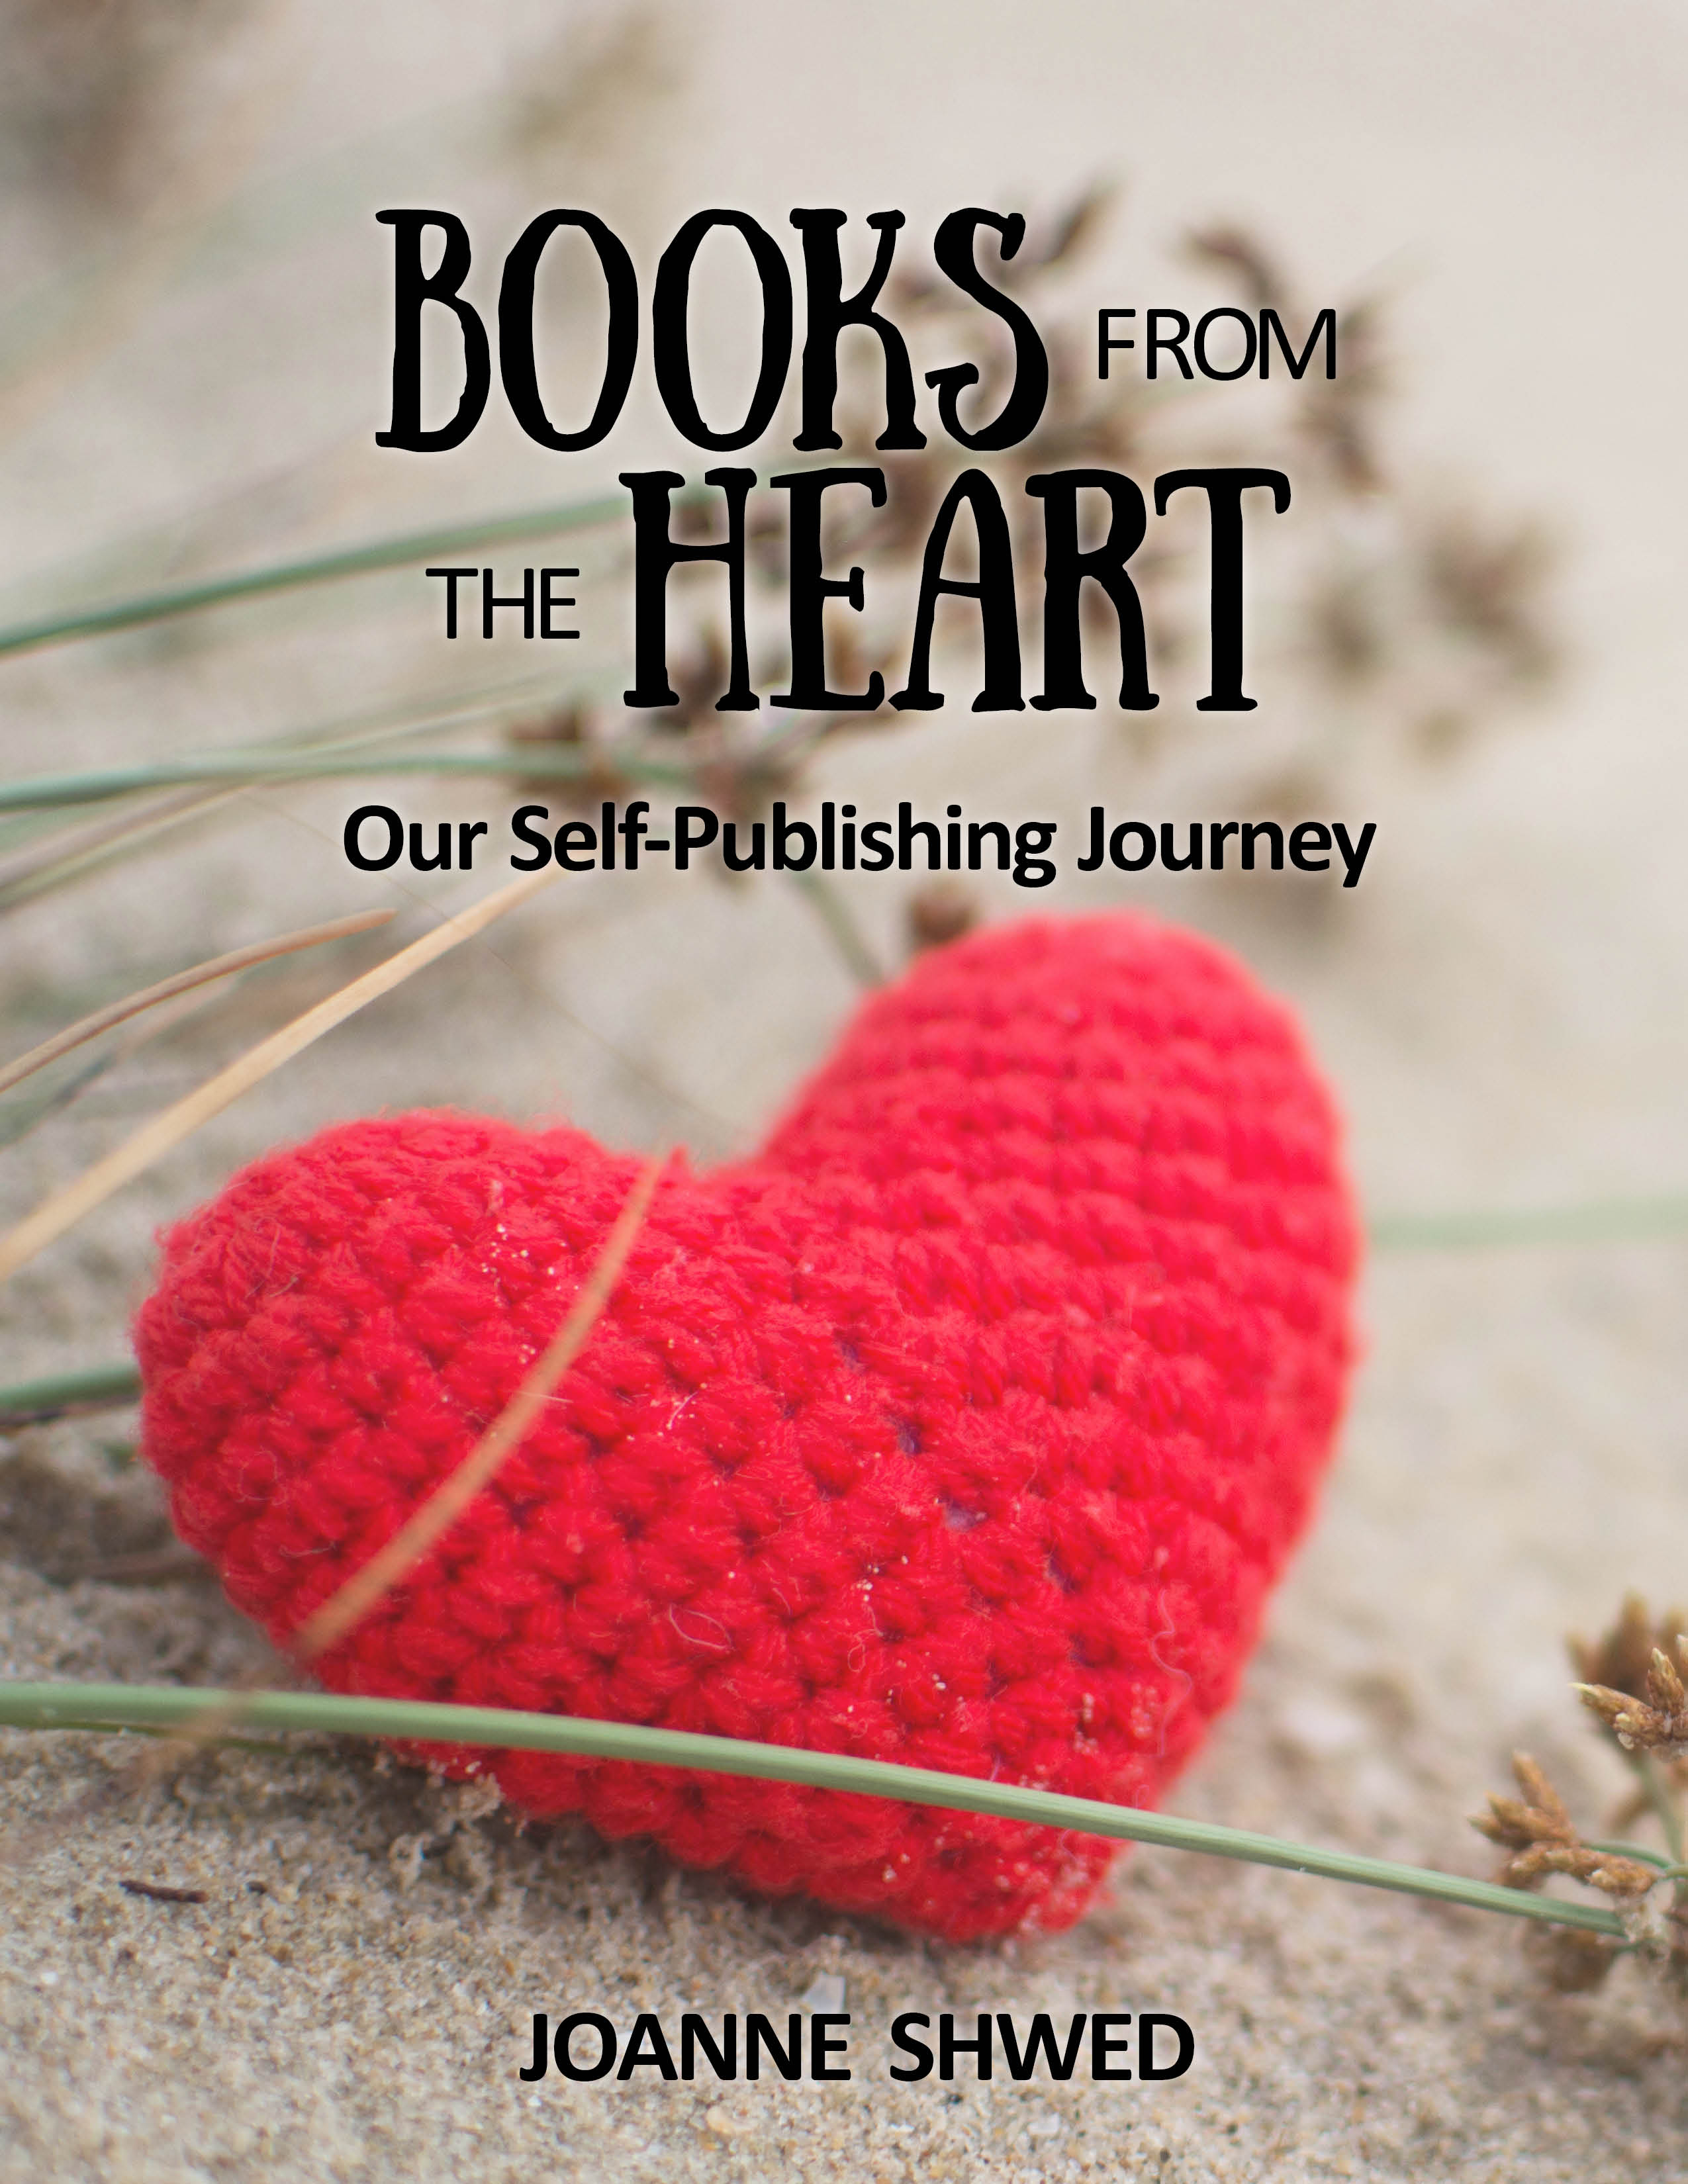 Books from the Heart: Our Self-Publishing Journey